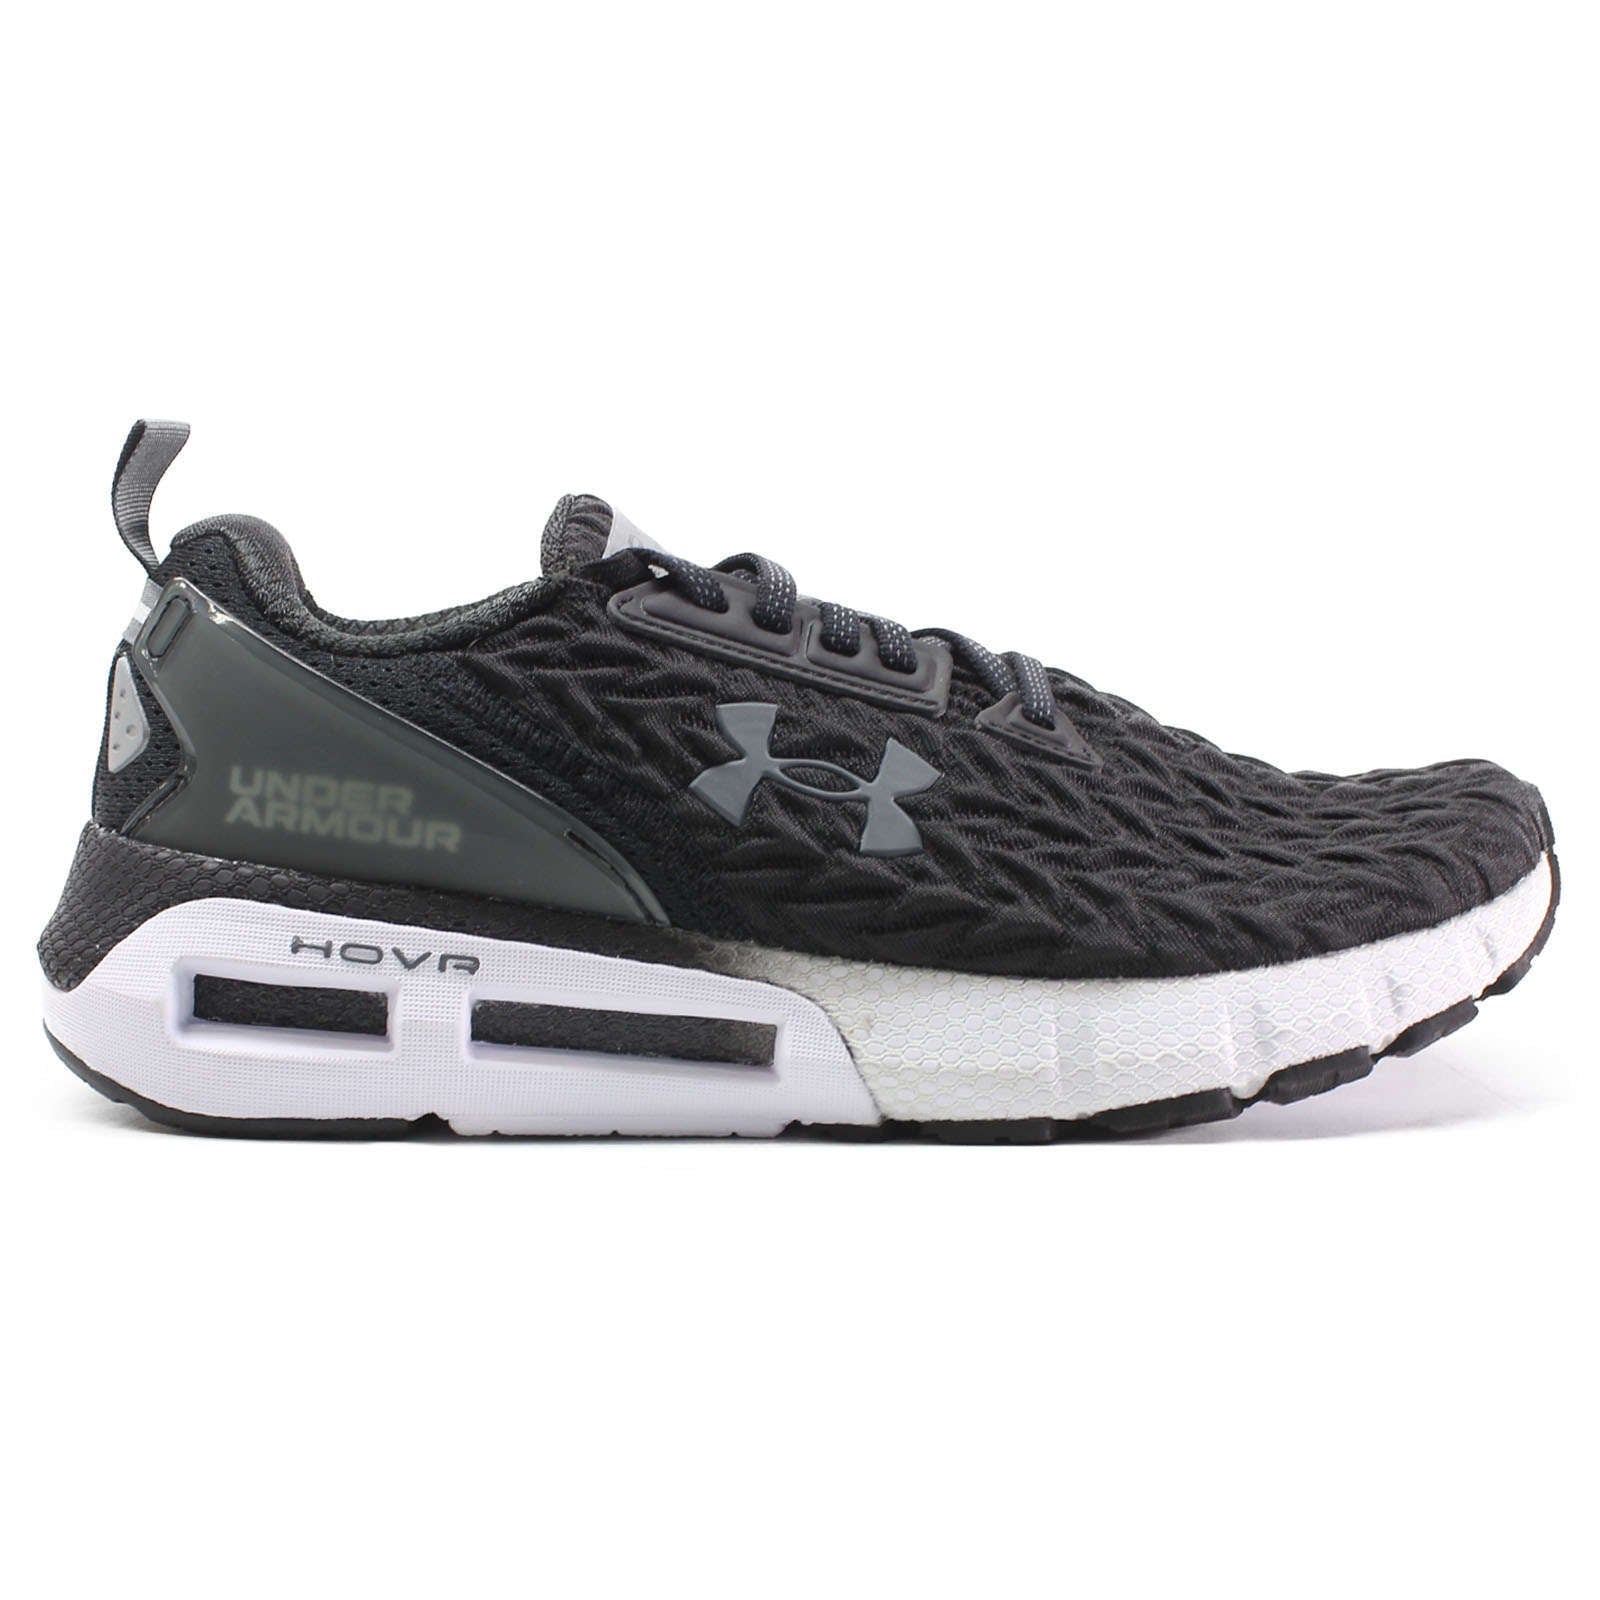 Under Armour HOVR Mega 2 Clone Synthetic Textile Men's Low-Top Sneakers#color_black white